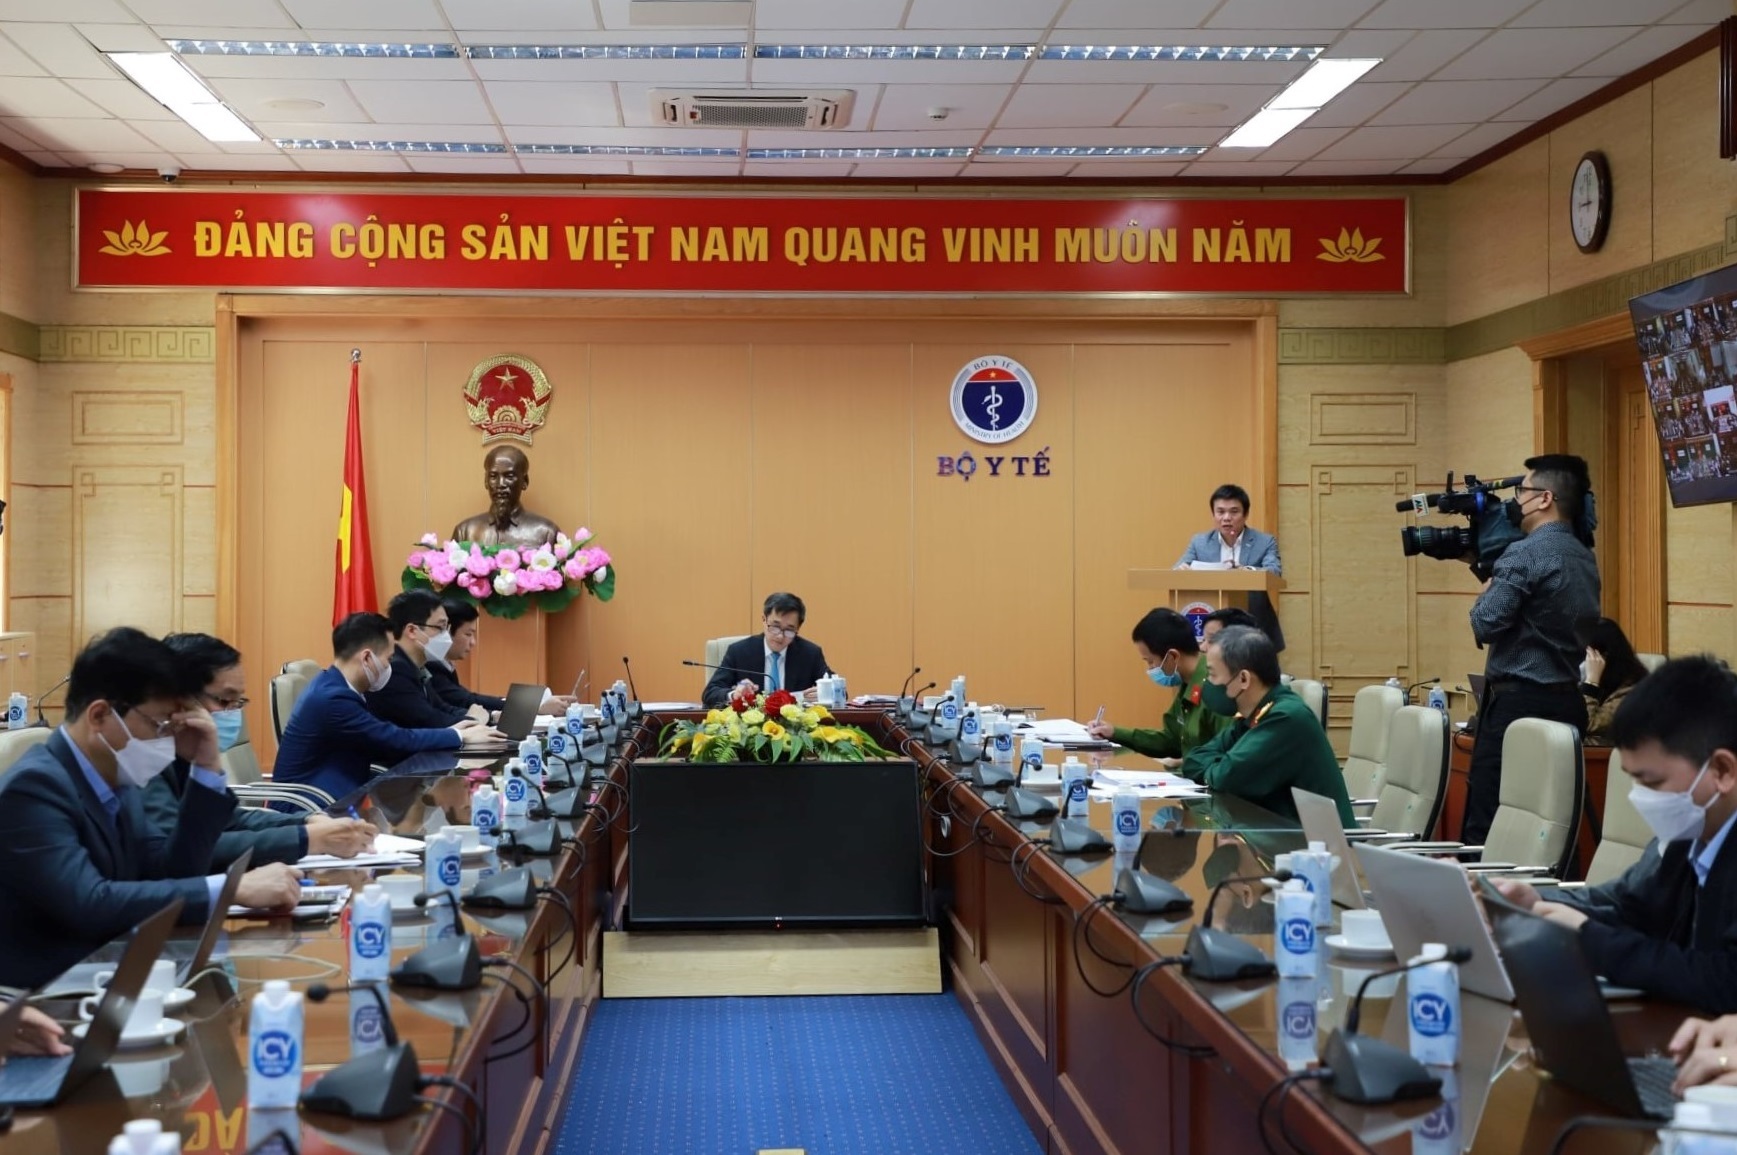 Vietnam issued passports for Covid-19 vaccine from April 15, what should people do?